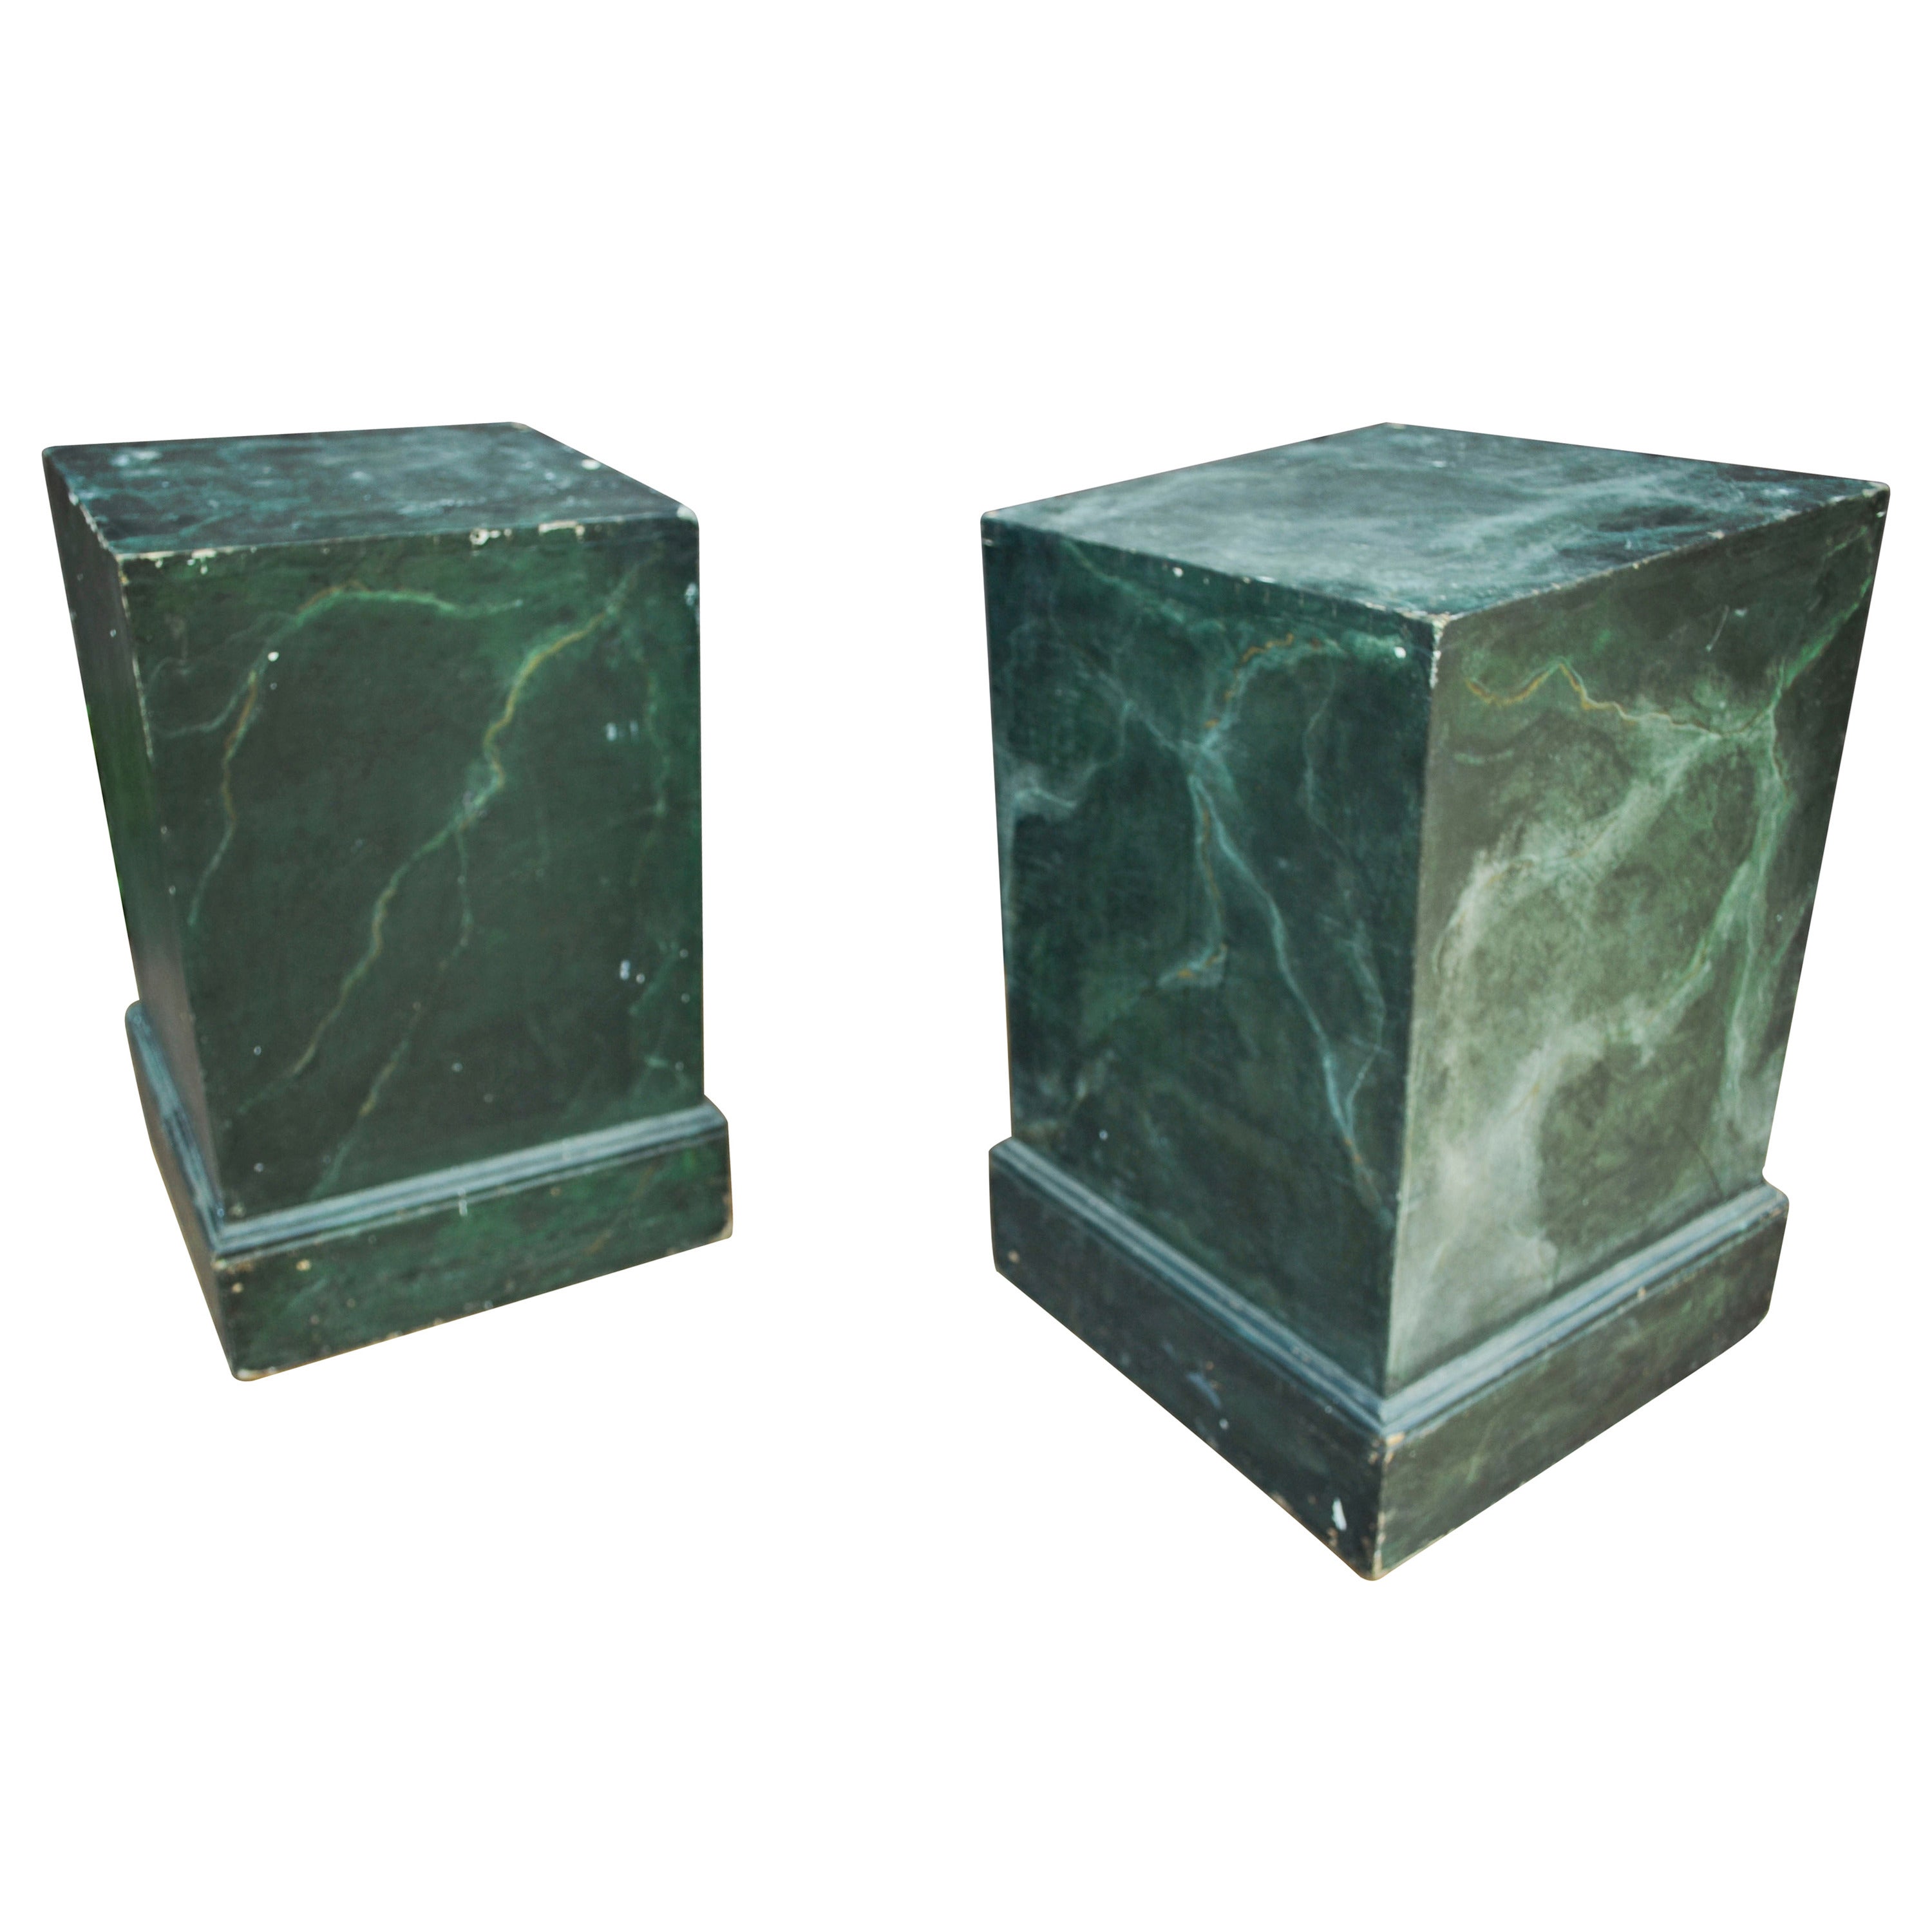 Pair of Vintage Malachite Painted Wood Pedestals, c. Early 20th Century For Sale